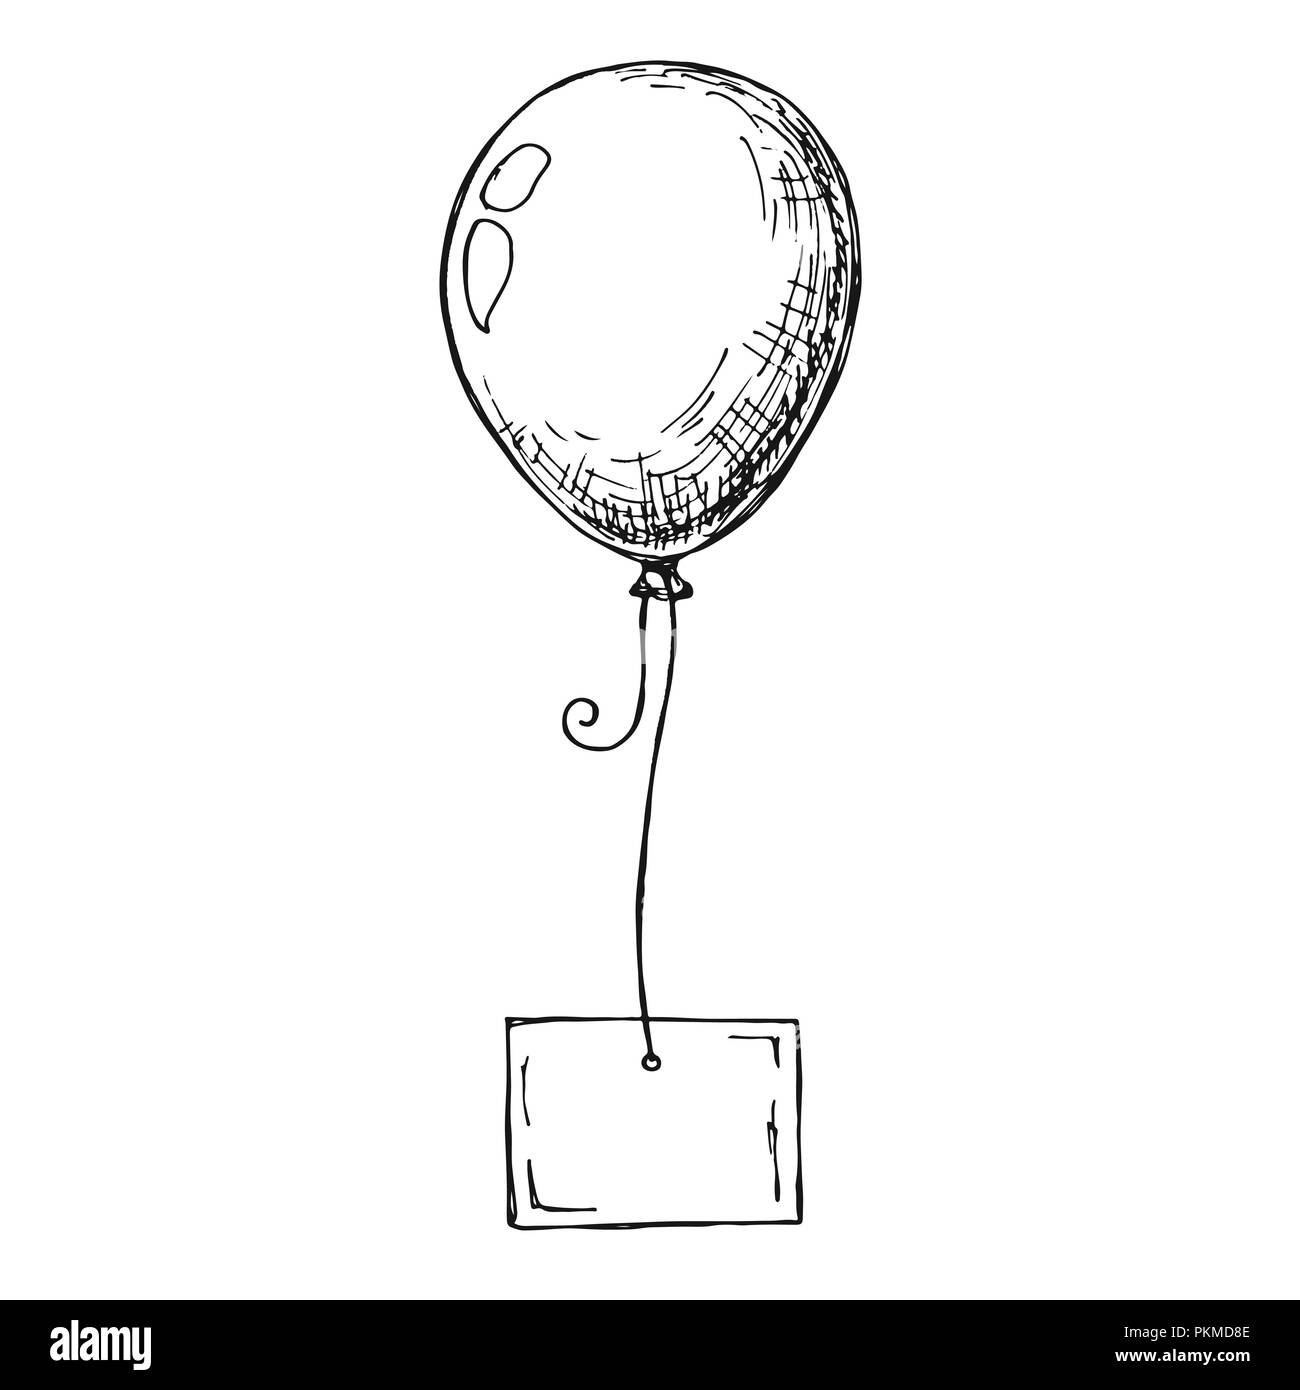 Top Drawing Of A Bunch Of Balloons Stock Vectors Illustrations  Clip Art   iStock